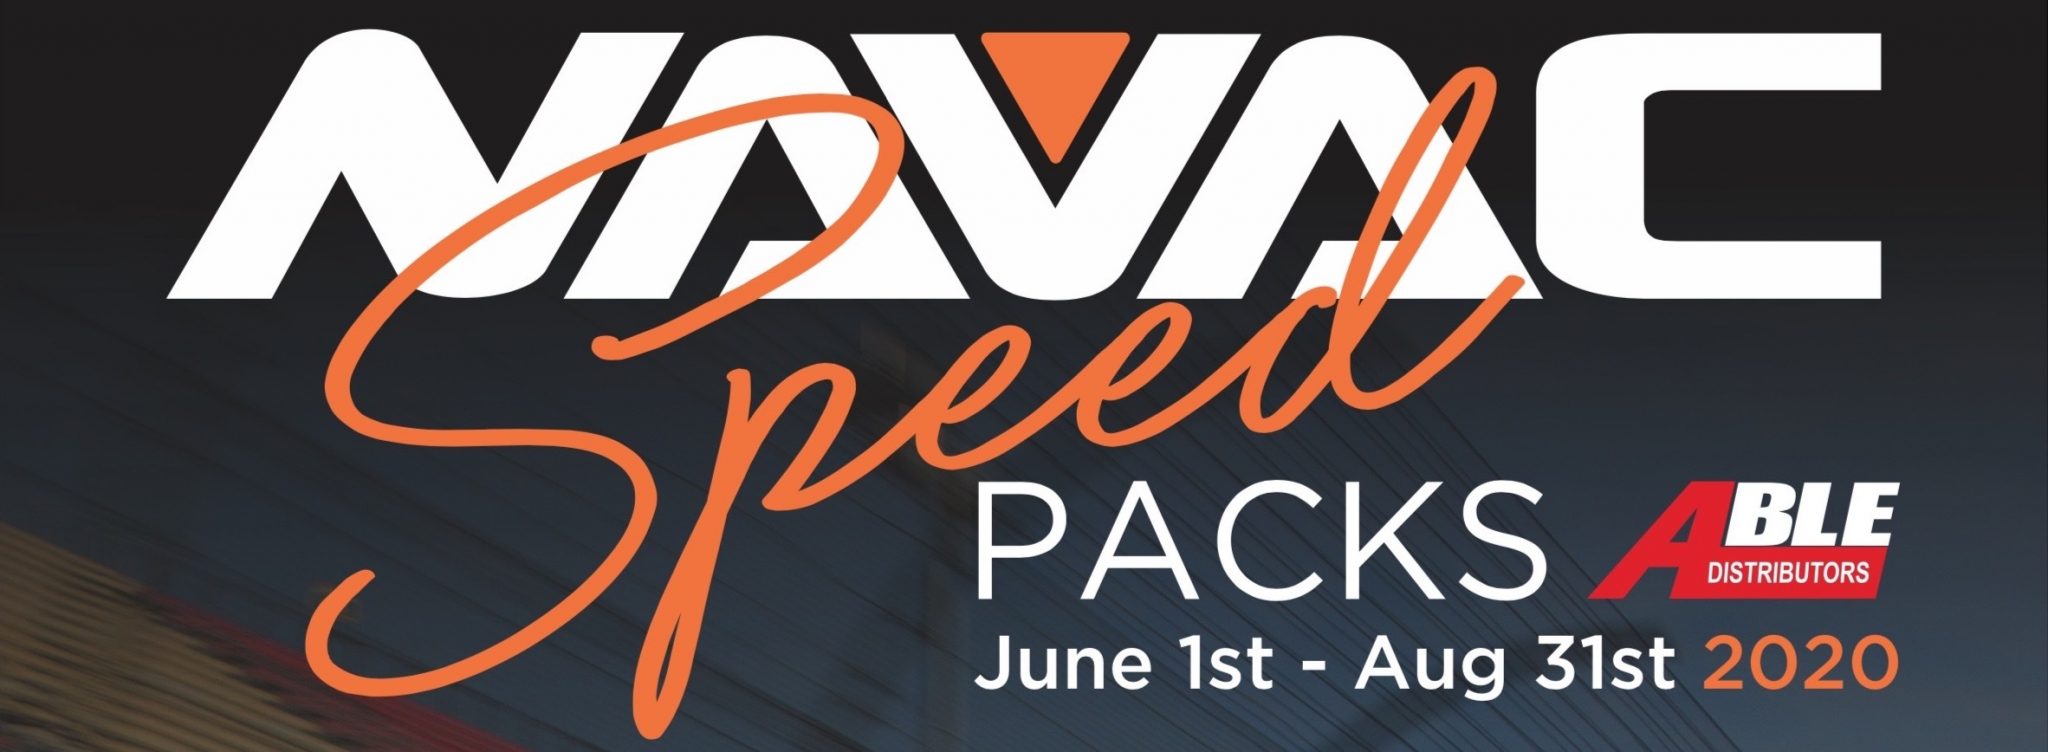 navac-speed-packs-now-at-able-able-distributors